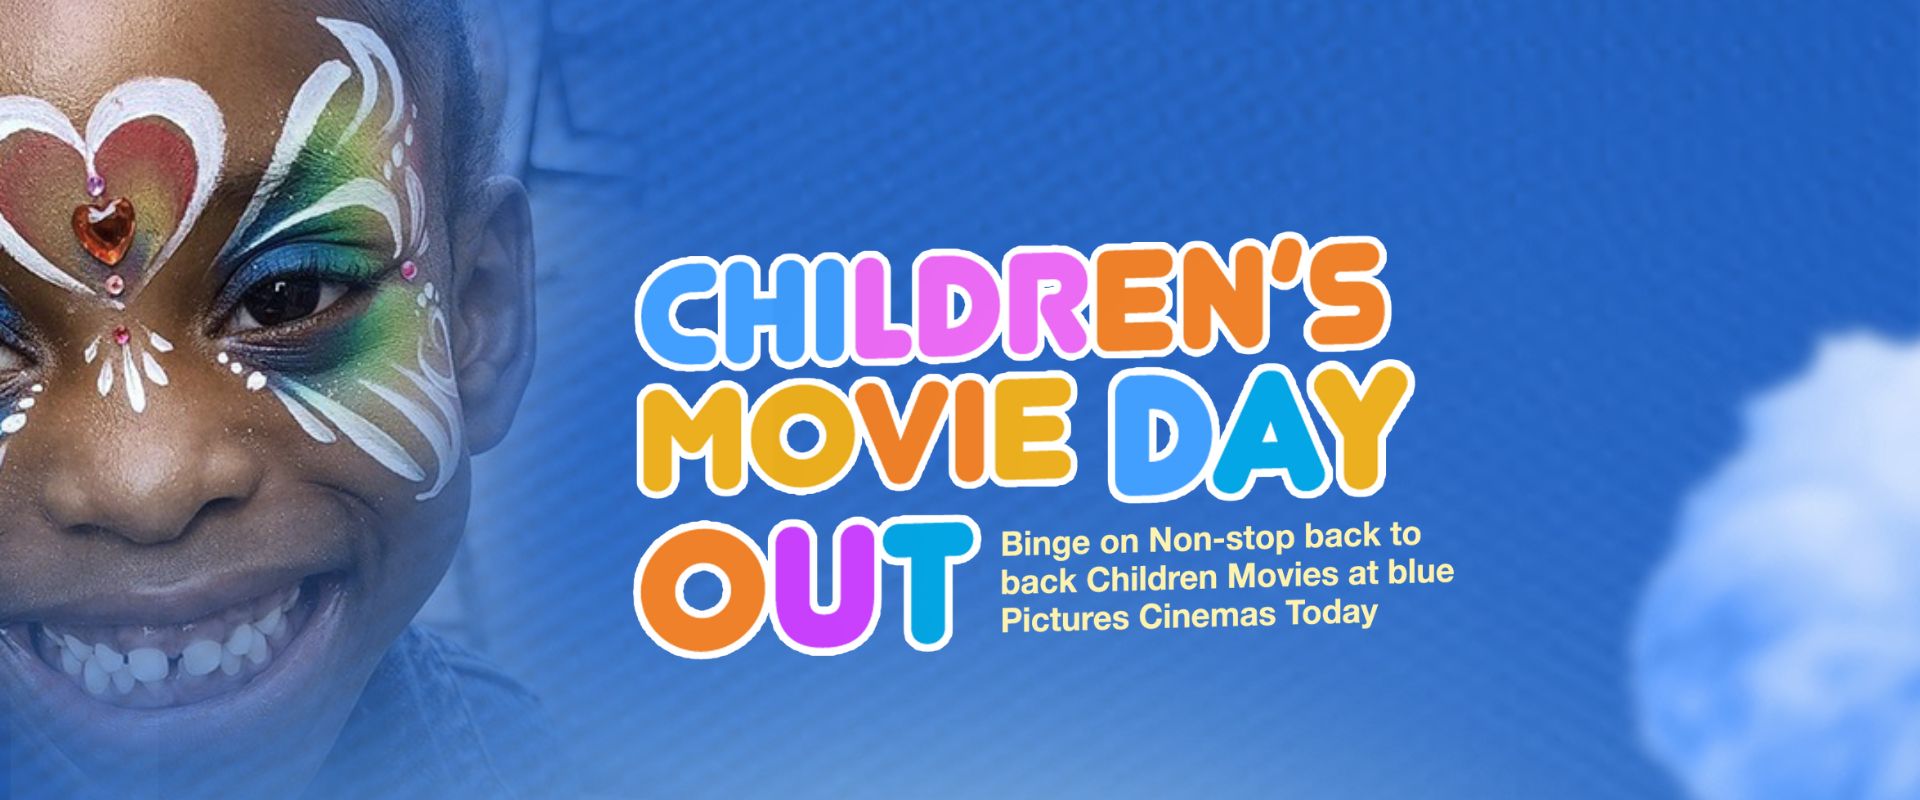 Children's Movie Day Out